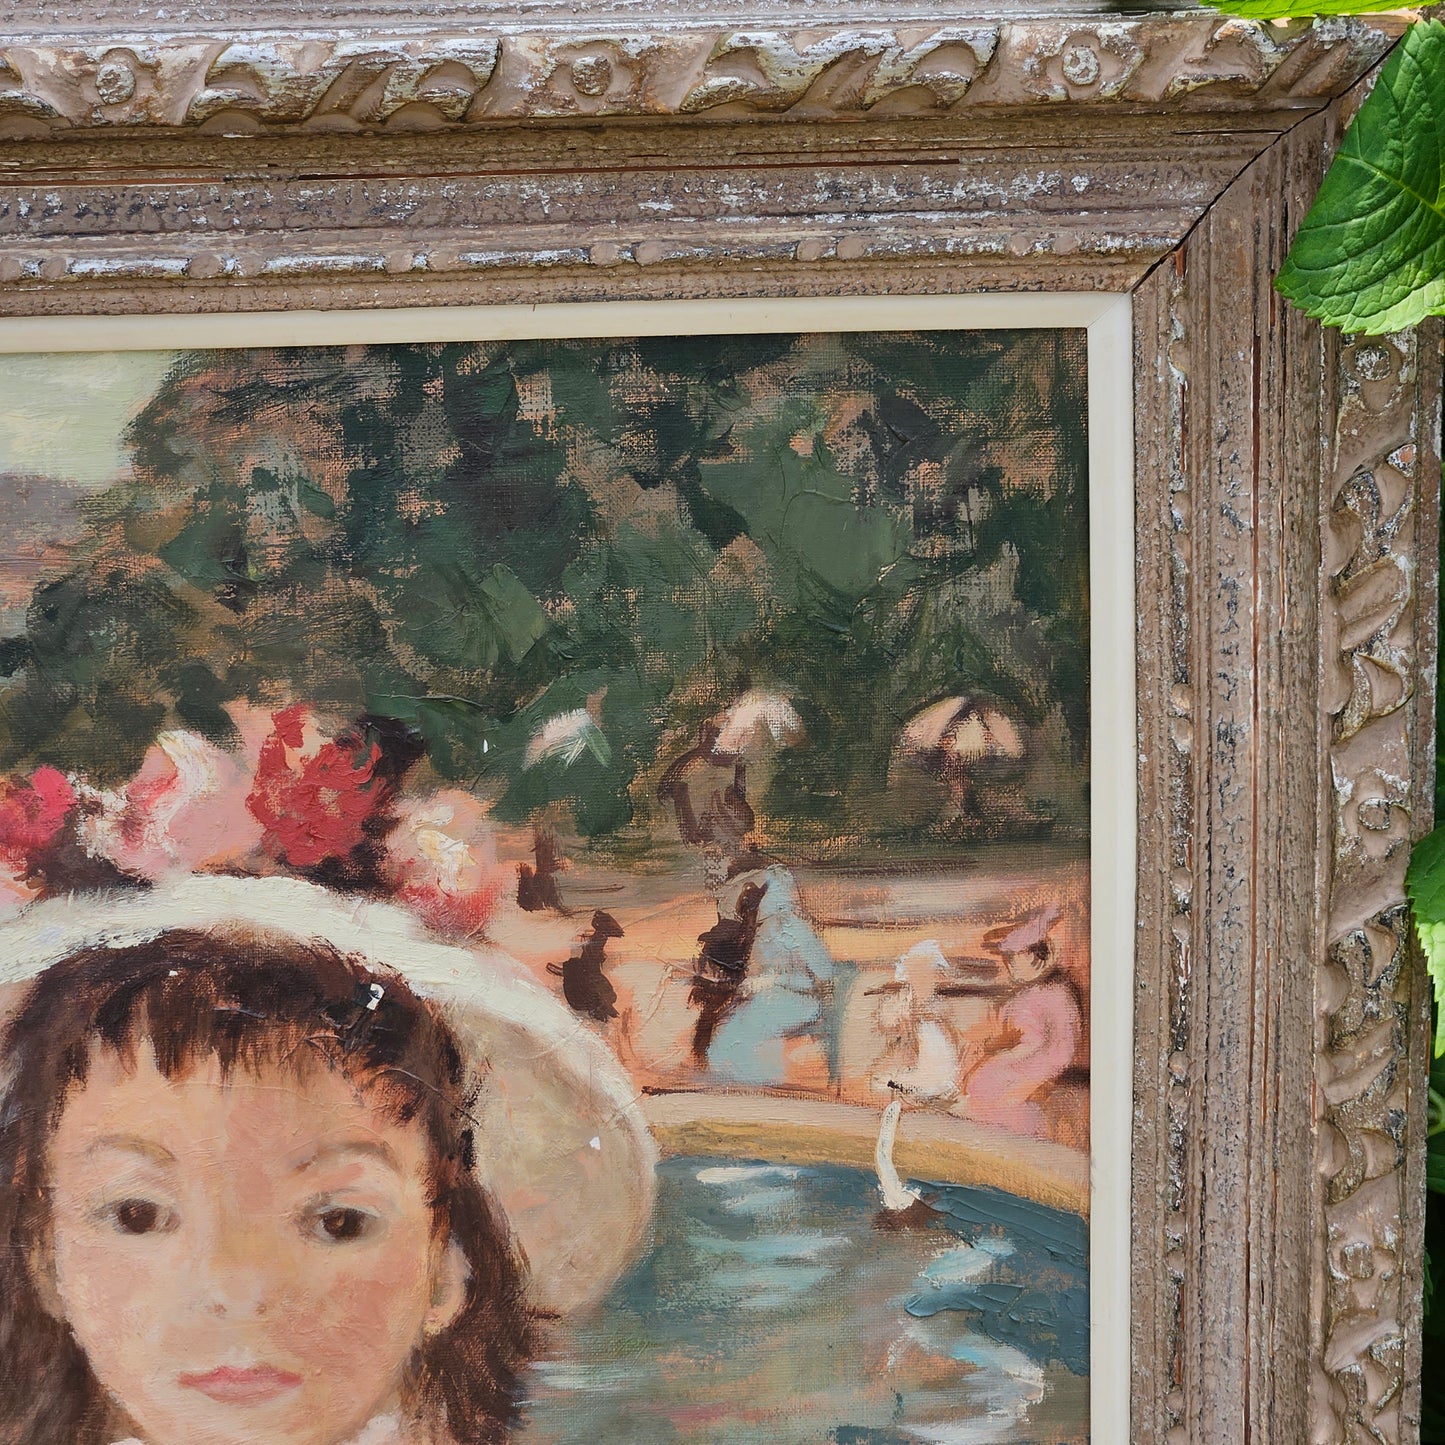 Impressionist Dietz Edzard Style Portrait of Young Girl at the Seaside Signed "Benayzard"